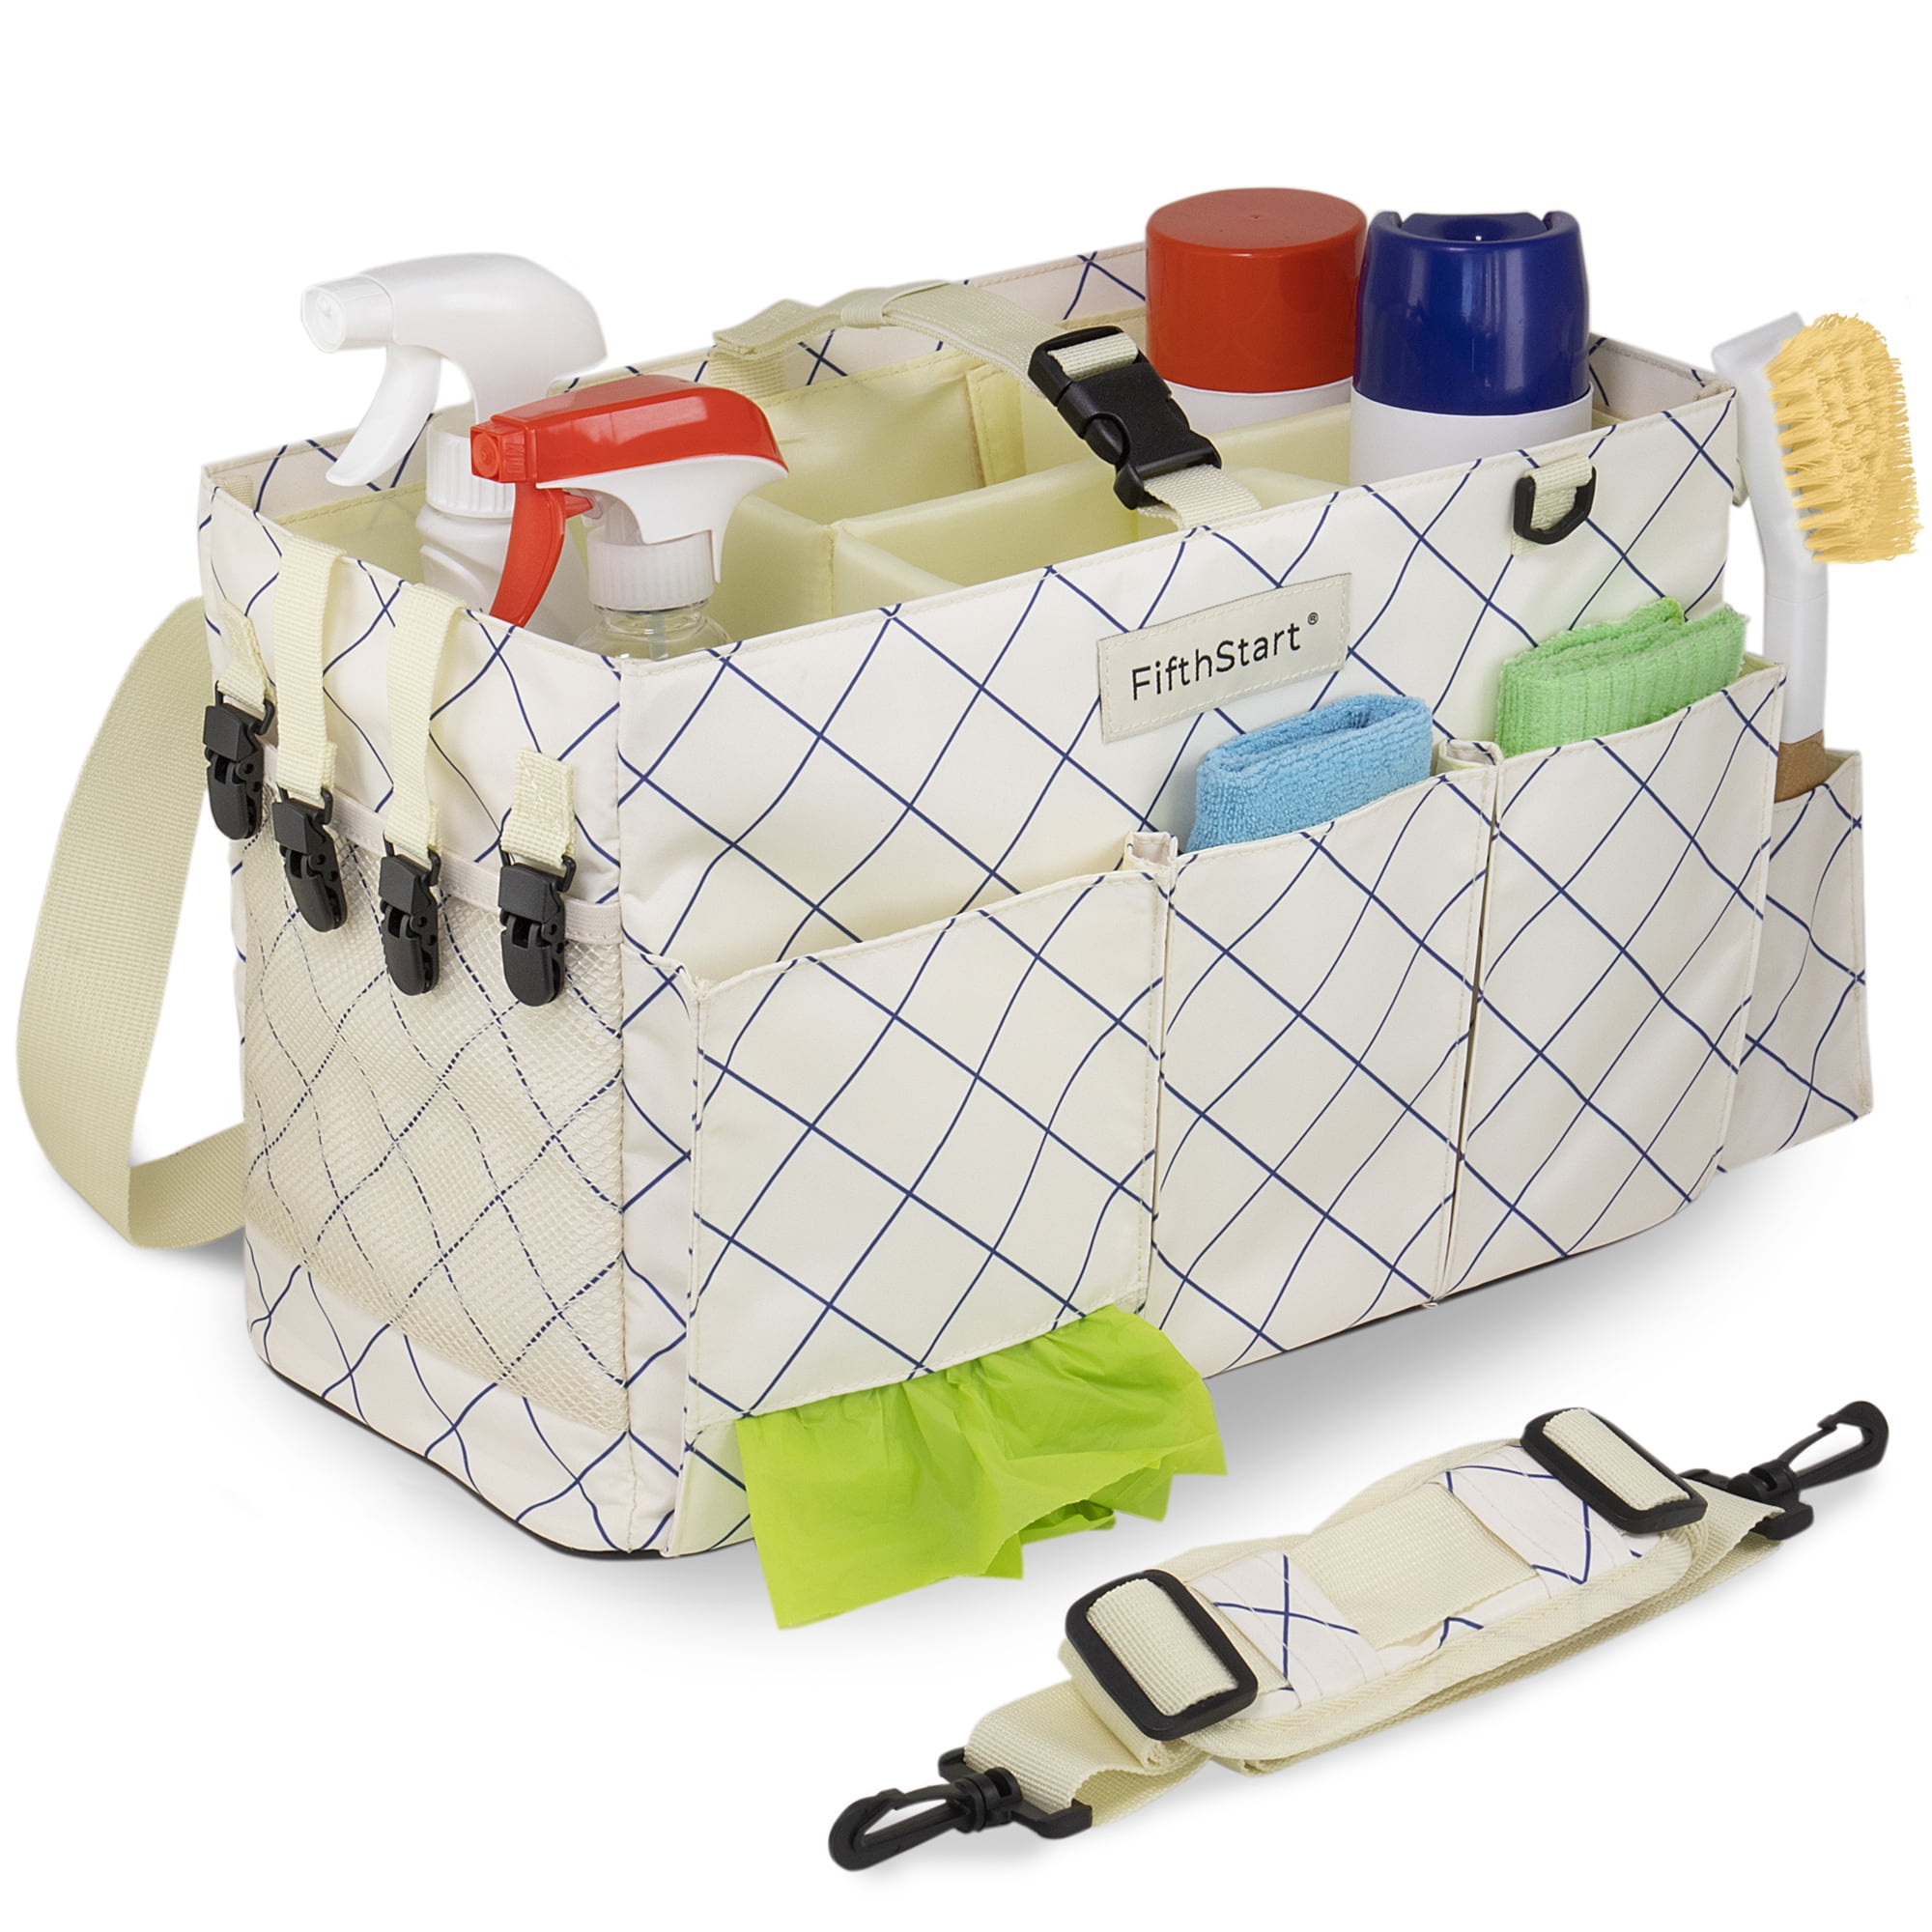  LandnEOO Portable Cleaning Caddy, Waterproof, Large, Wearable,  Strong, Versatile, 17 x 8 x 10